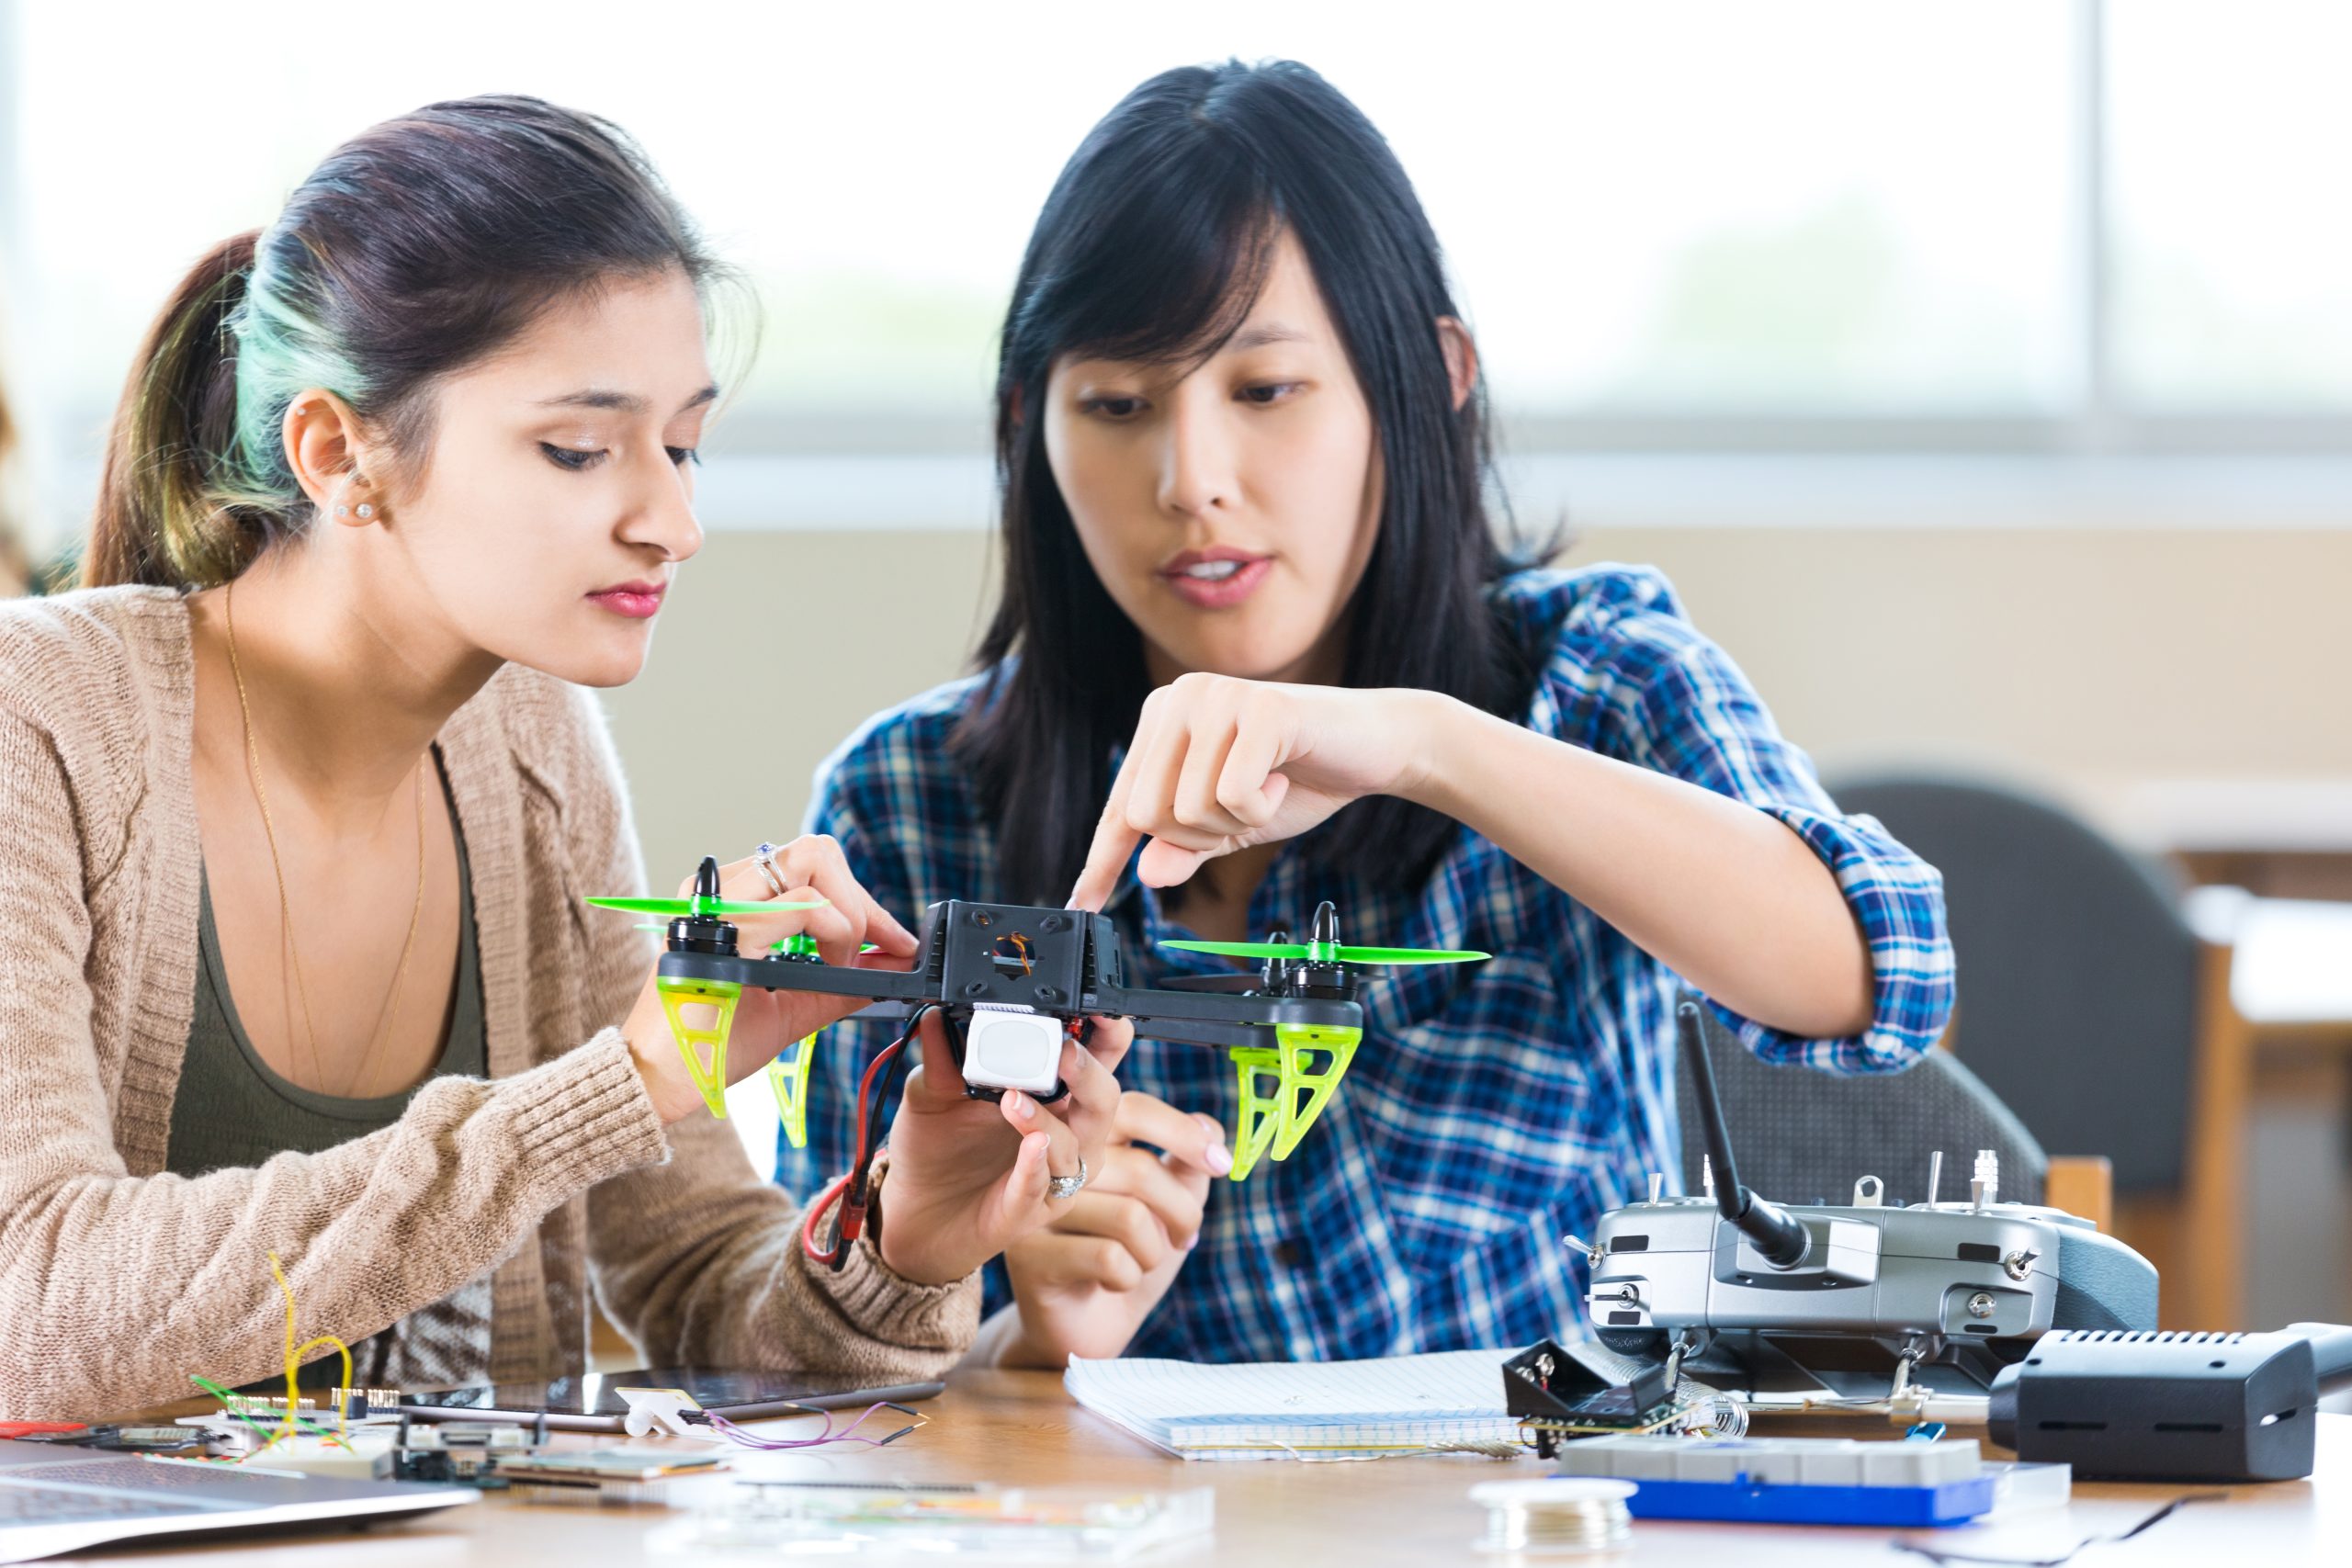 Pretty Asian teacher at STEM school helps Hispanic student with drone in engineering class. The teacher is pointing to something on the drone as the student looks on. The controller and other parts or tools are on the table. The teacher is wearing a blue plaid shirt and the student is wearing trendy layered clothing.